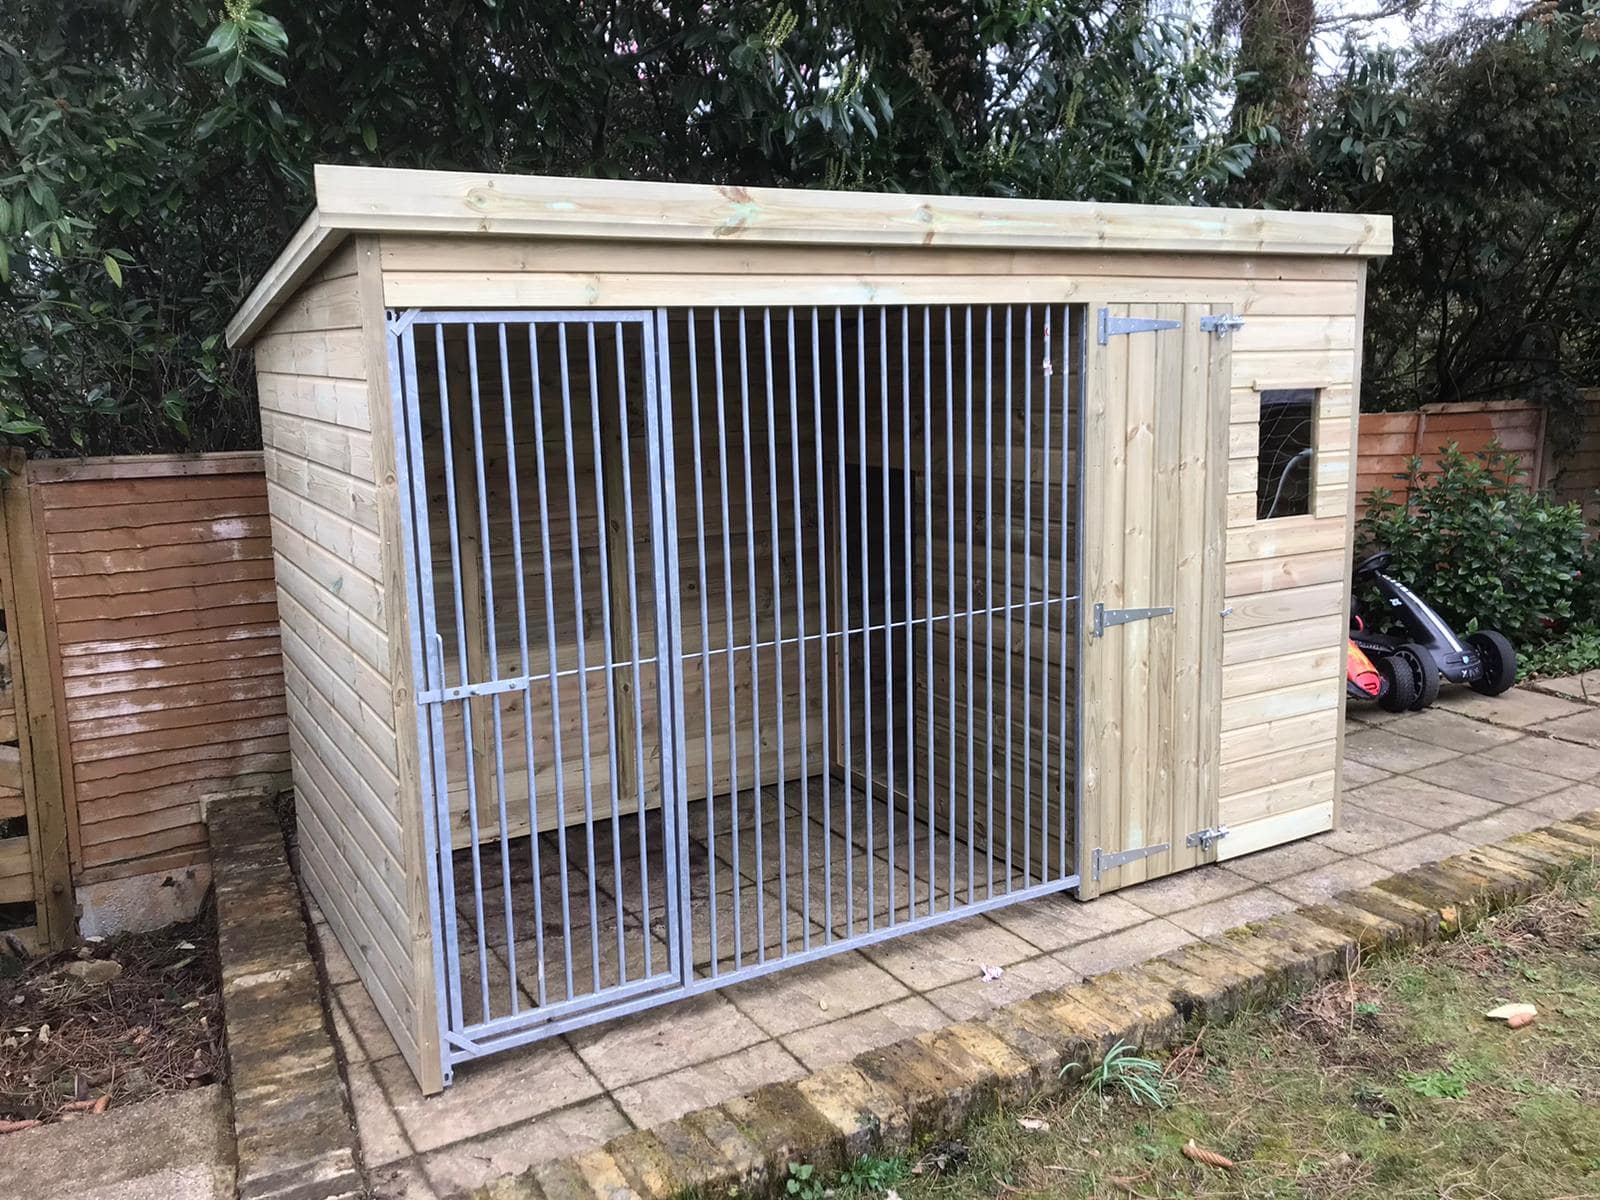 Stapeley Dog Kennel 10'6ft (wide) x 6ft (deep) x 6'6ft (high)